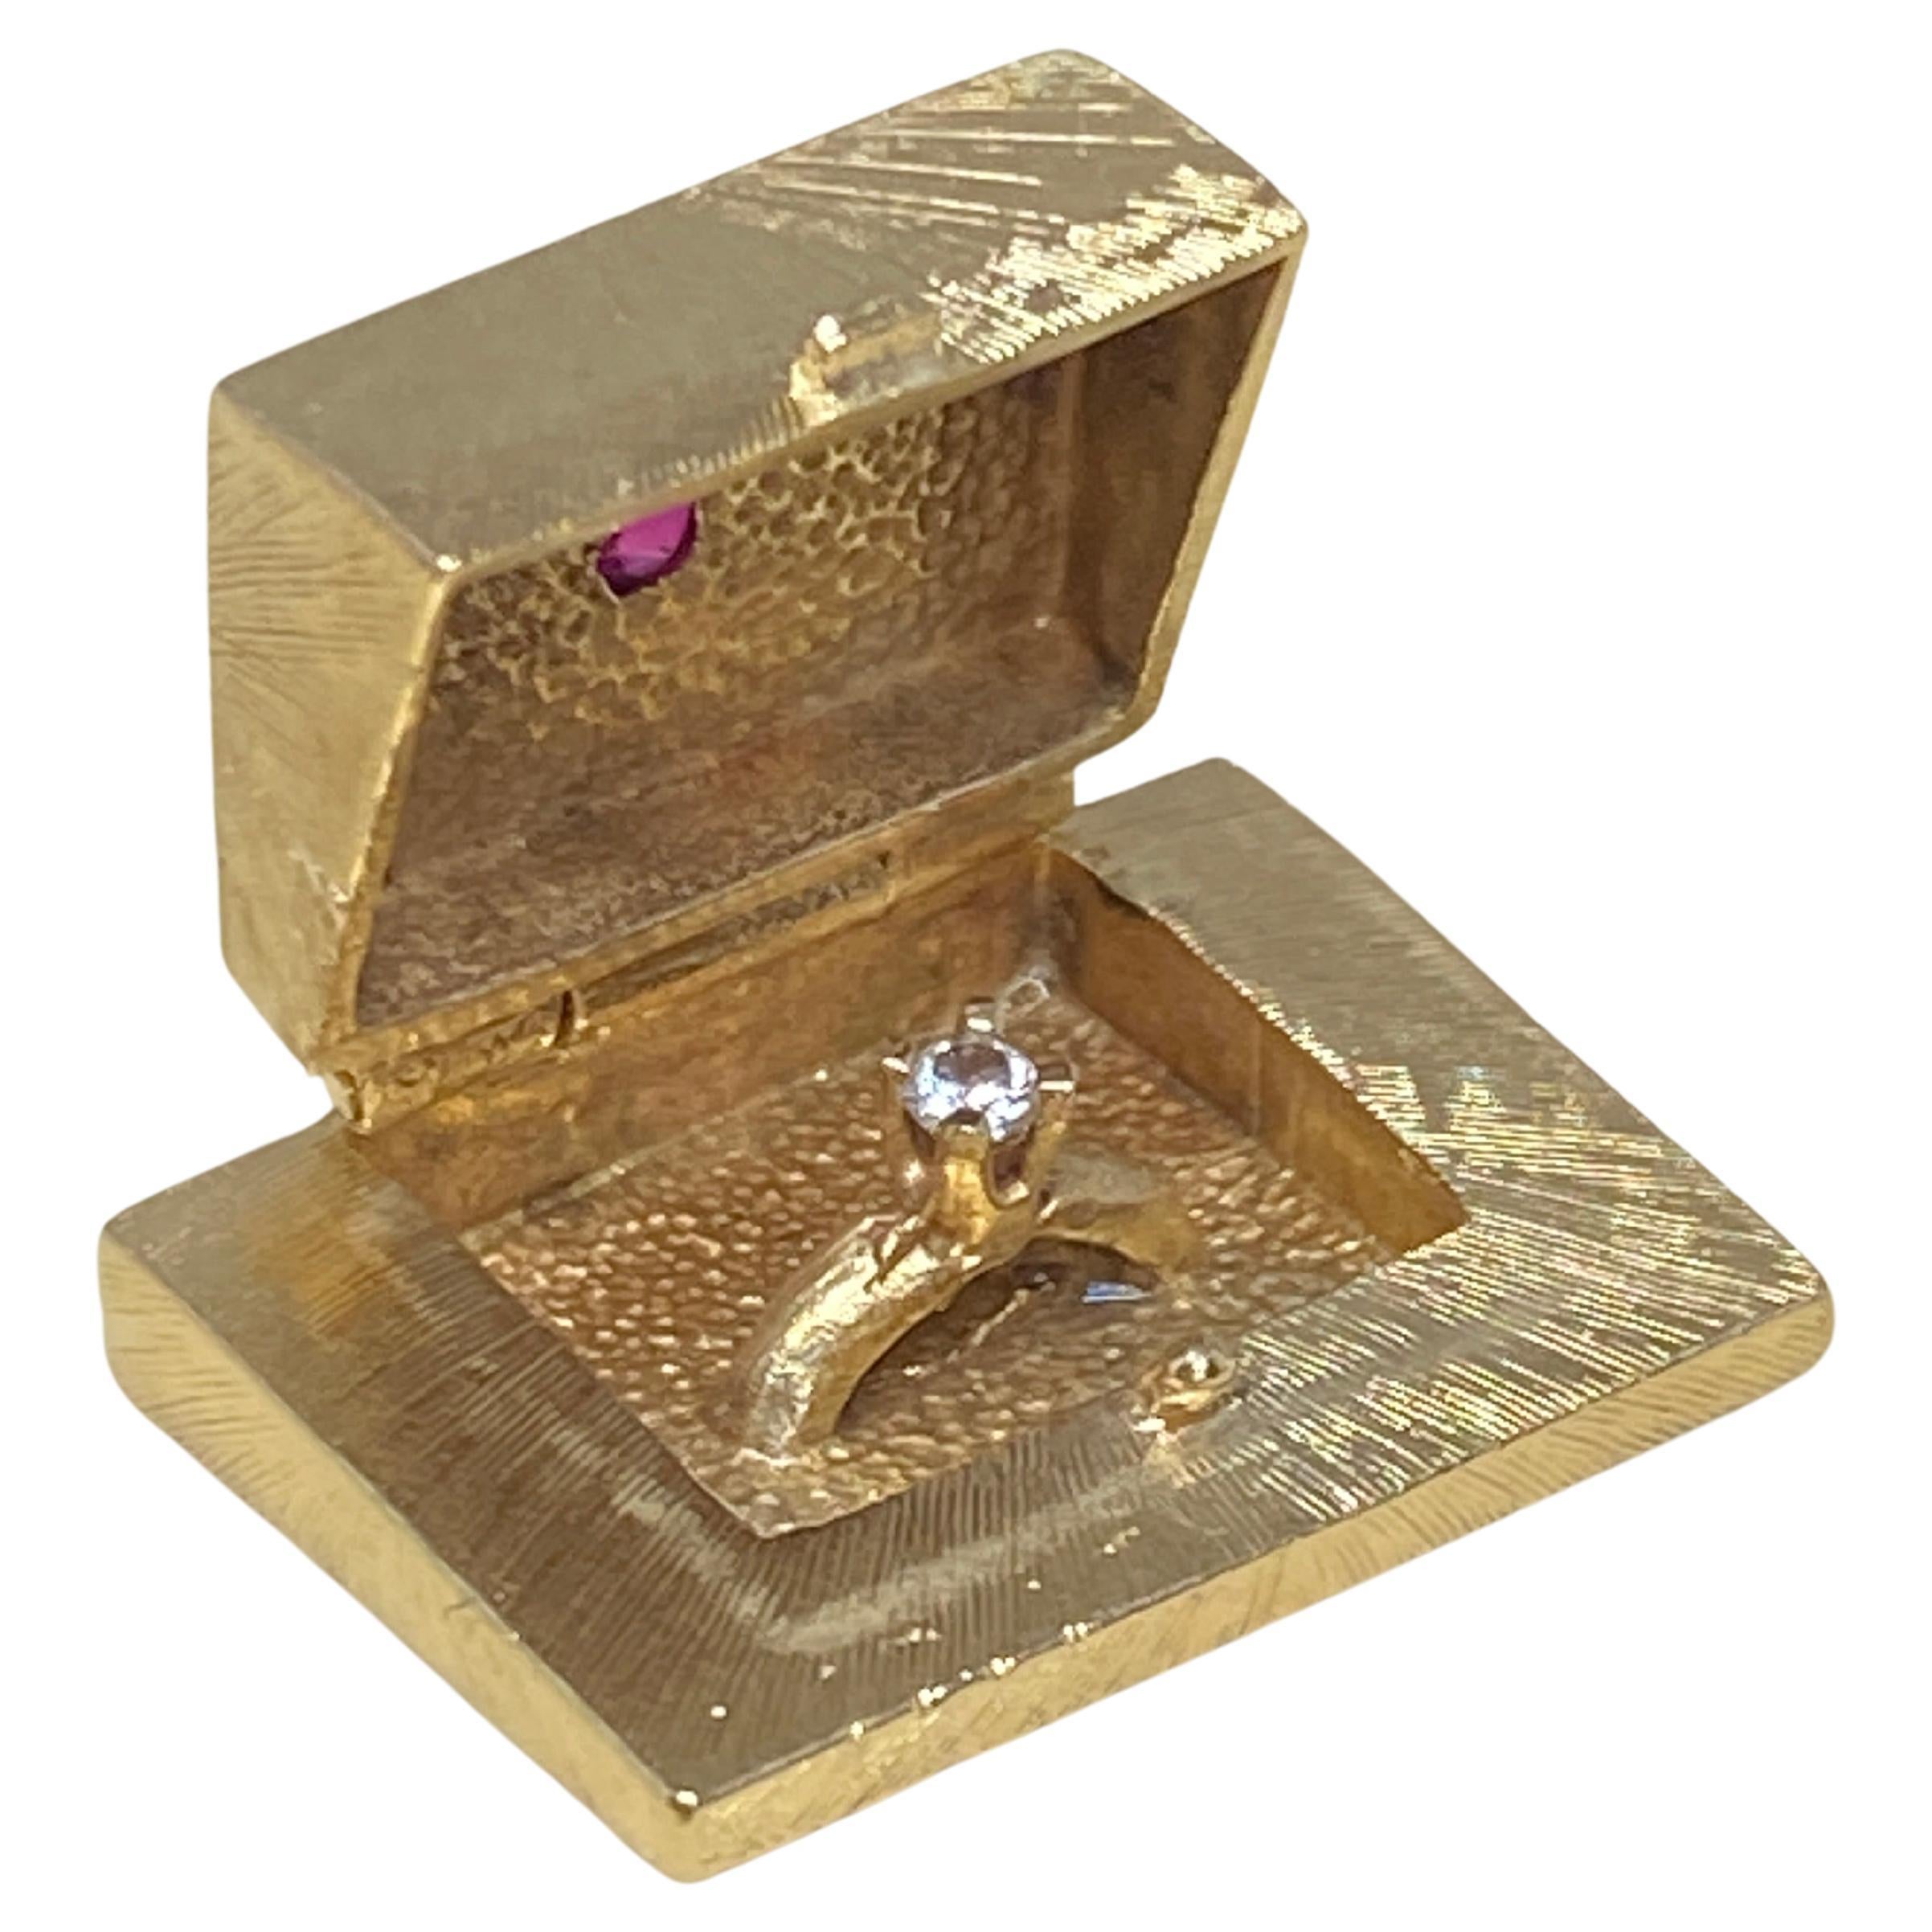 Charming vintage mid century box charm crafted in 14 karat yellow gold with florentine finish, adorned with a sparkling faceted ruby at the top.   The box top lifts from the hinge to reveal a sweet diamond solitaire ring.  This is a beautiful  charm